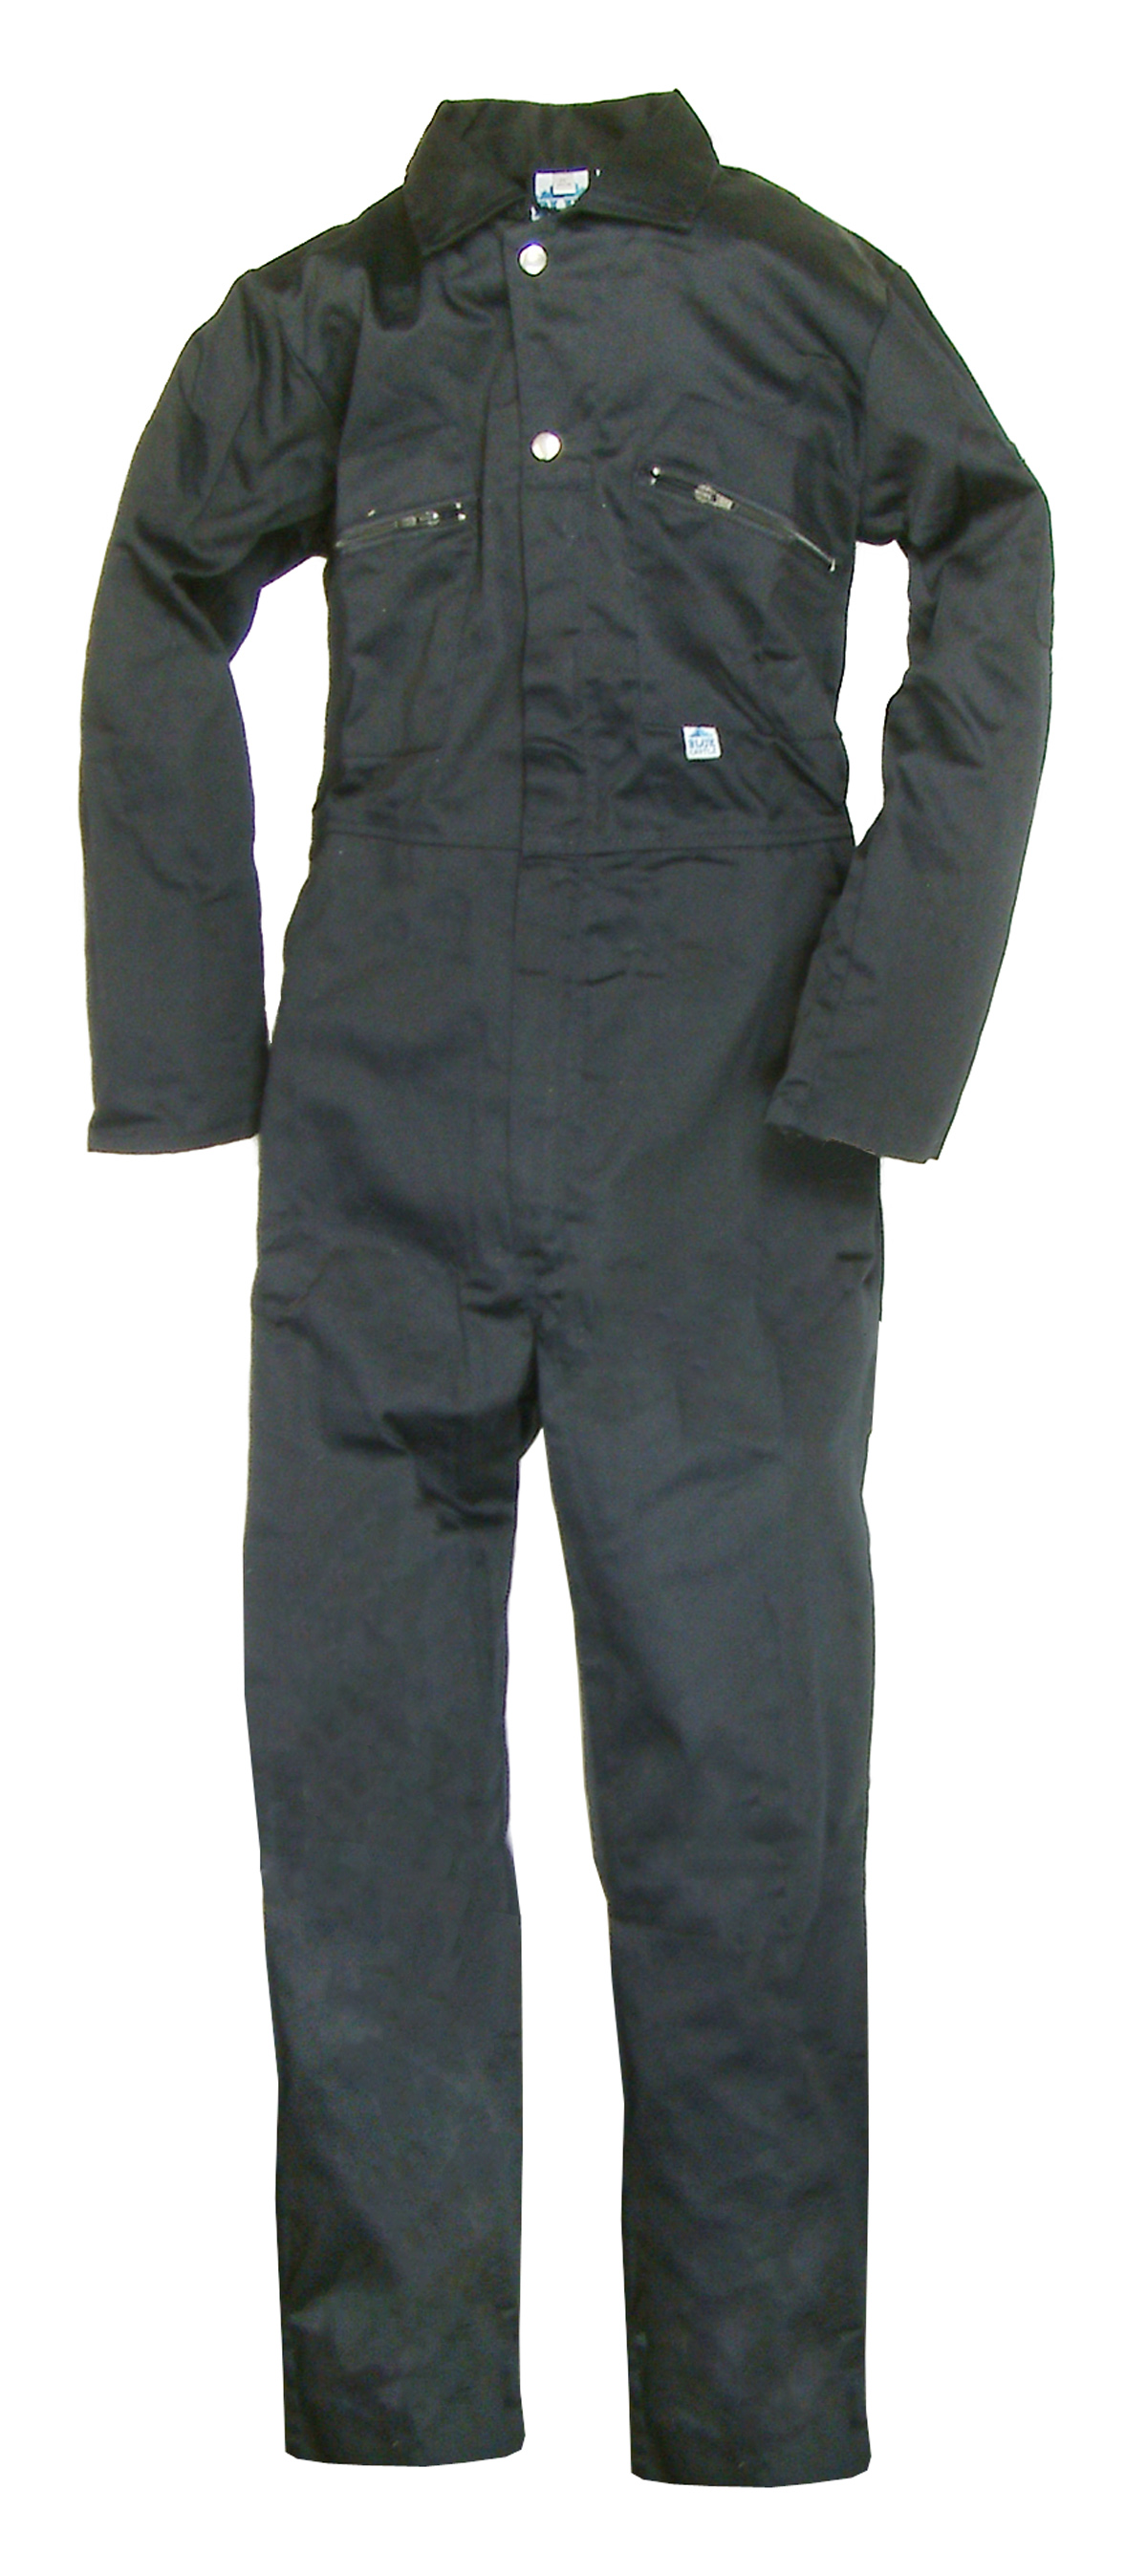 Poly/Cotton Work Overalls - Larger Sizes by Mil-com